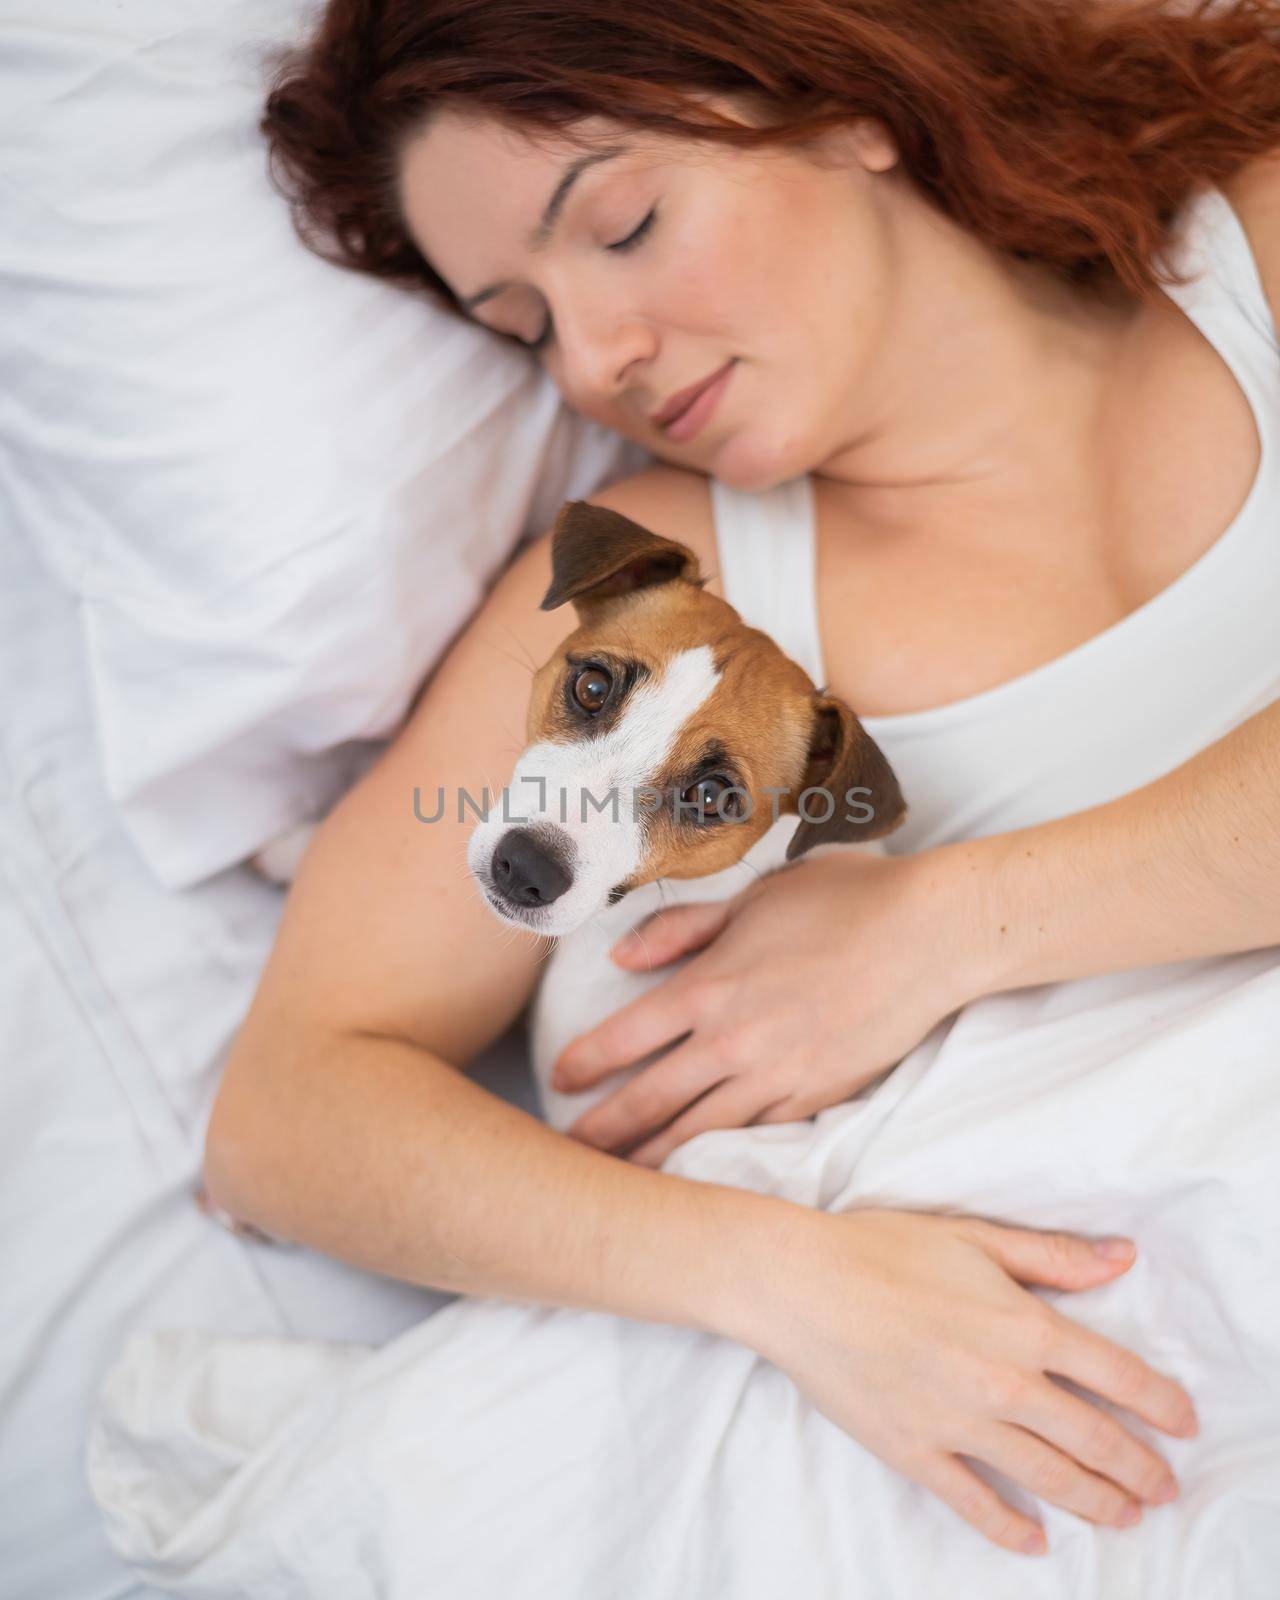 Caucasian woman is napping in bed hugging her beloved dog. by mrwed54